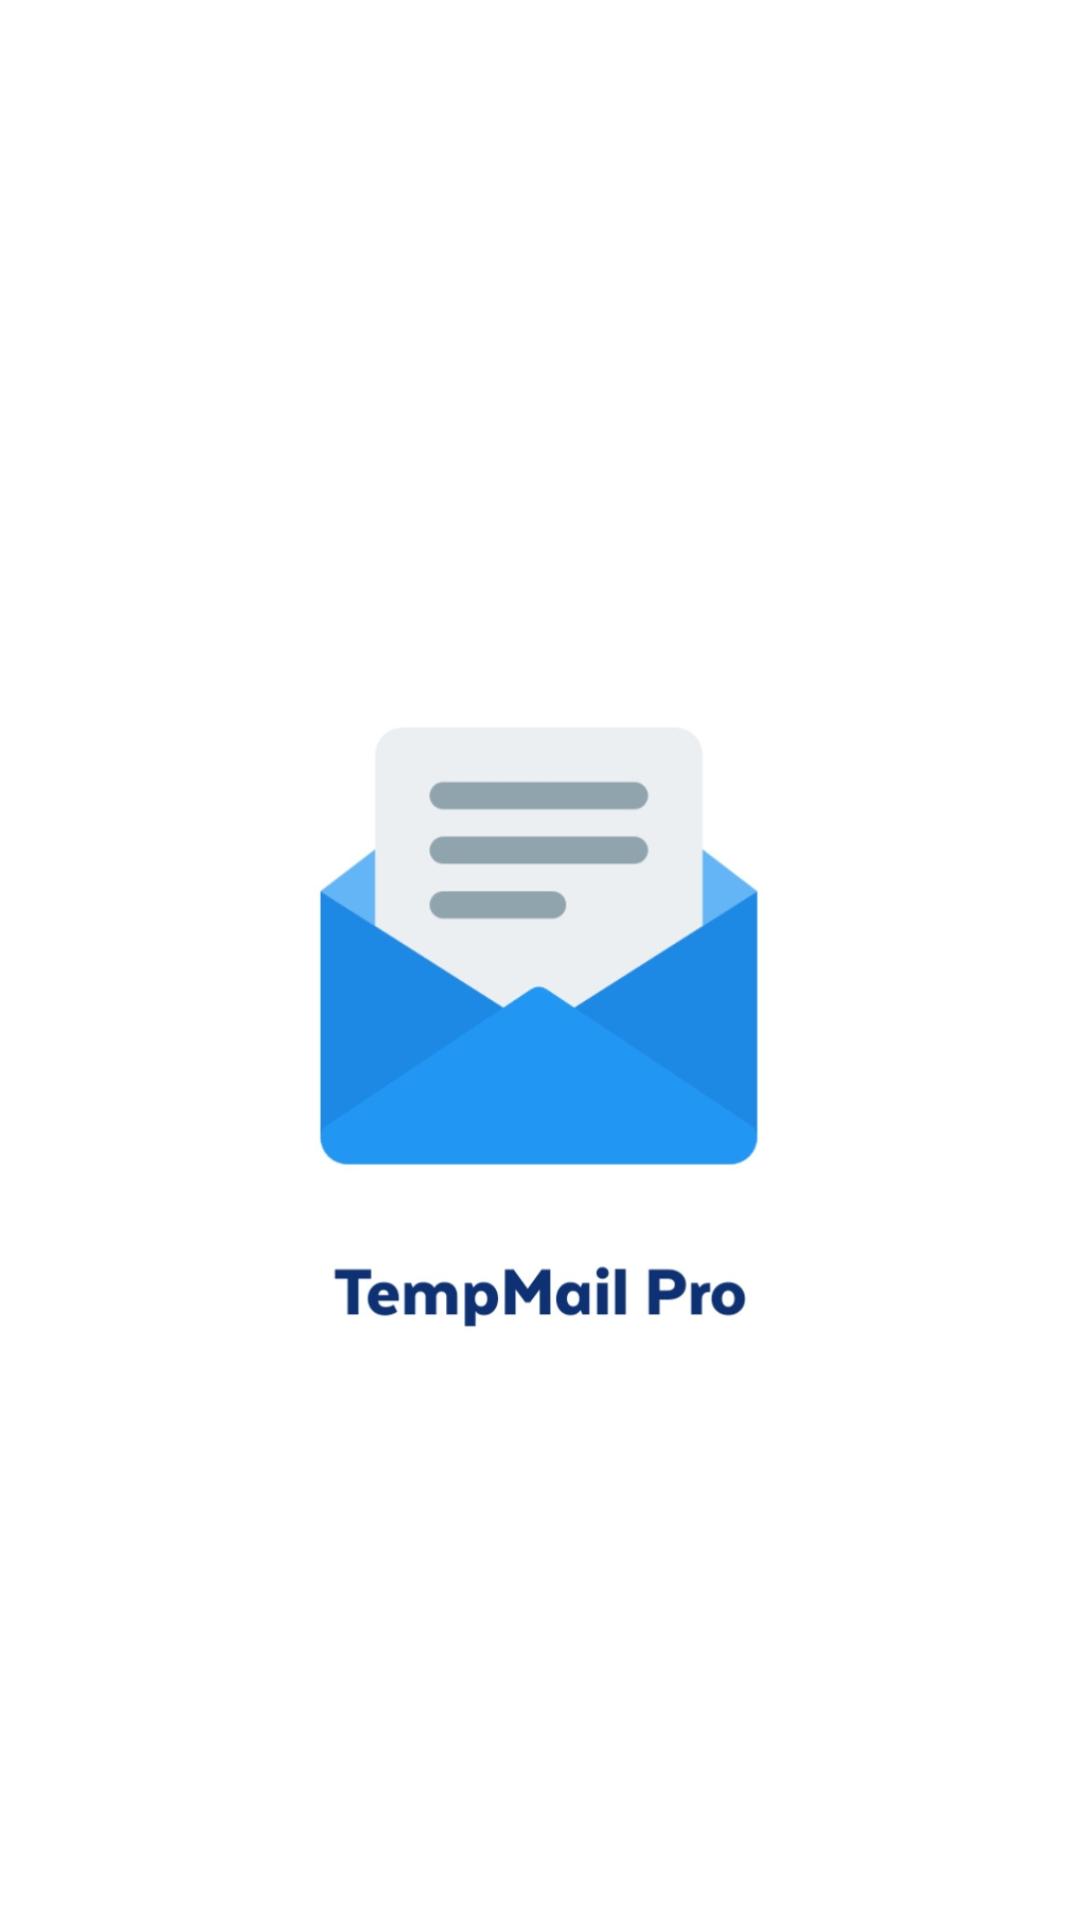 TEMPMAIL Pro. Темпмейл. Temp mail. PROPAY. Pay once